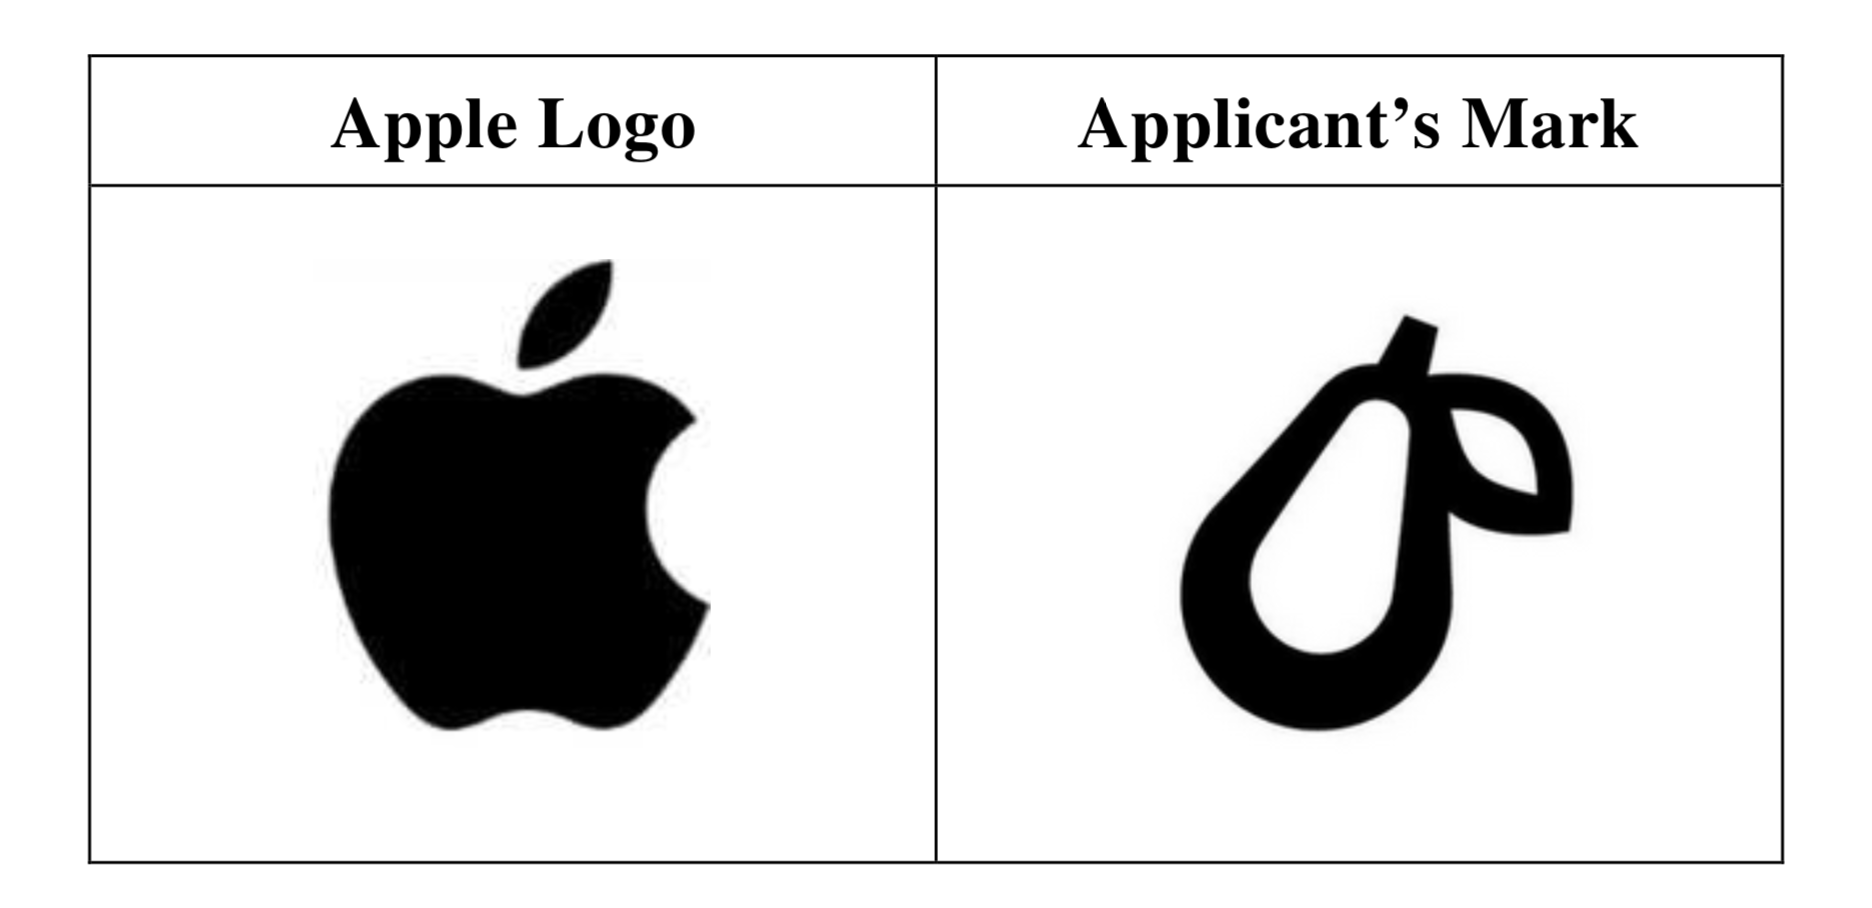 Image: From Apple’s notice of opposition